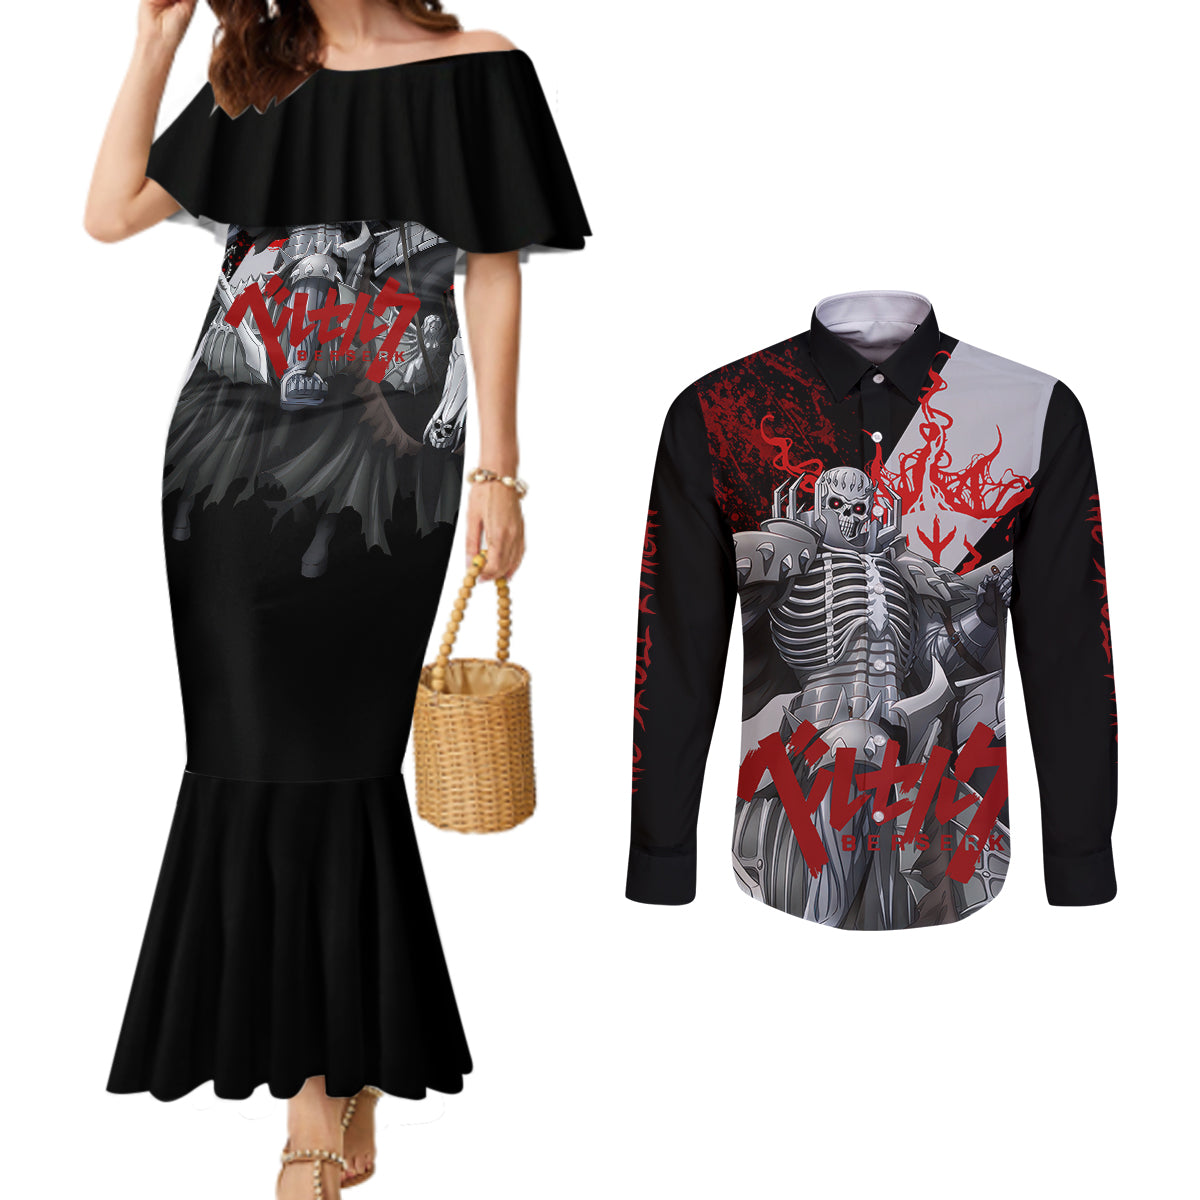 The Skull Knight Berserk Couples Matching Mermaid Dress and Long Sleeve Button Shirt Black Blood Style